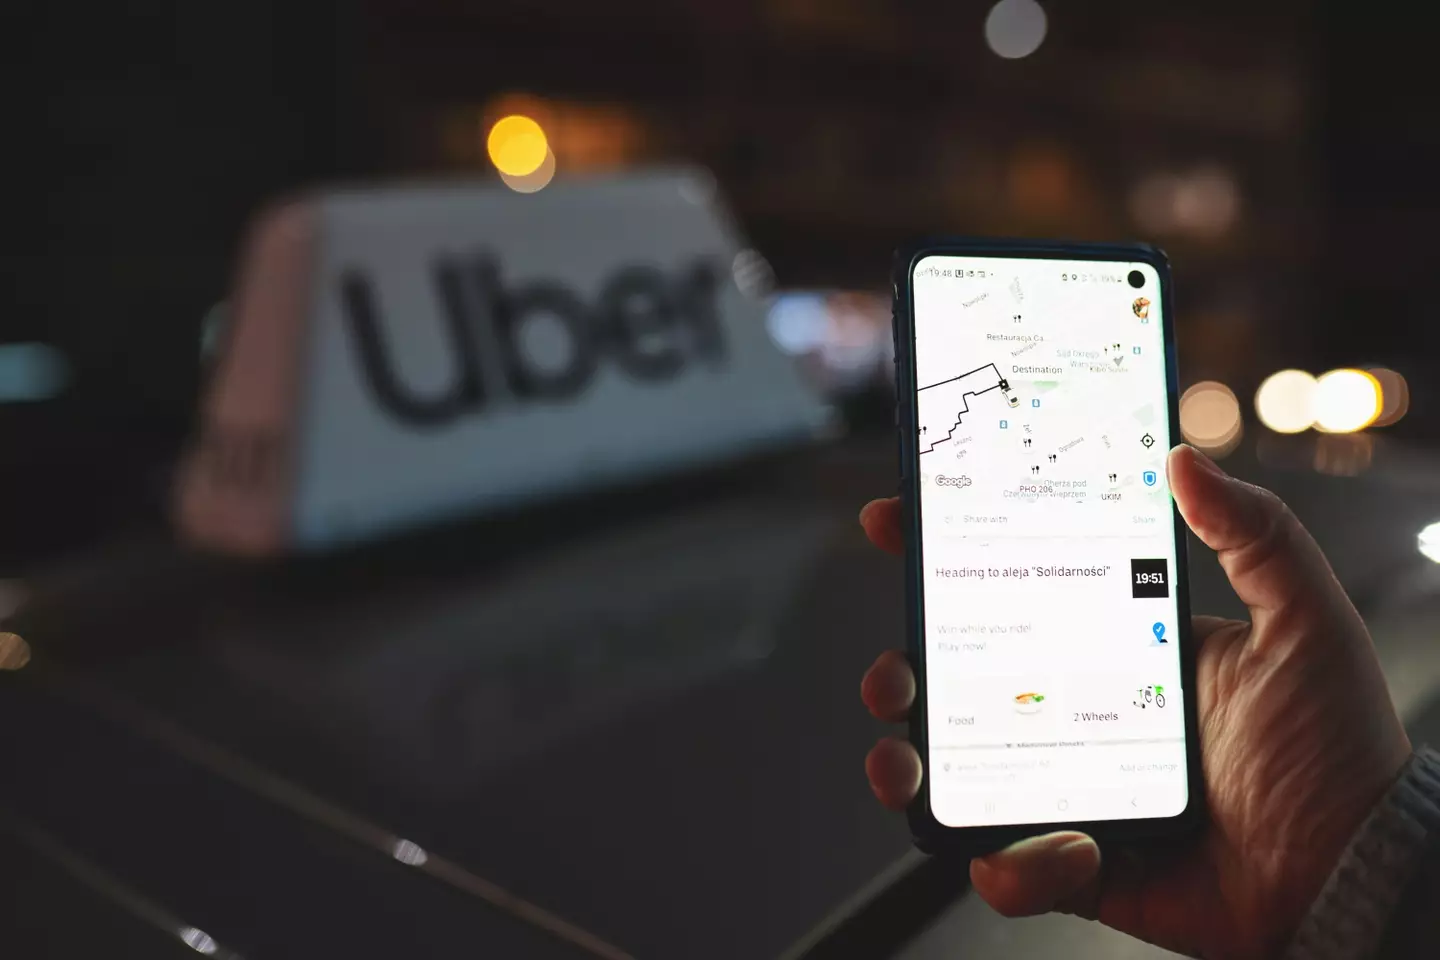 Uber has described the situation as 'unacceptable'.